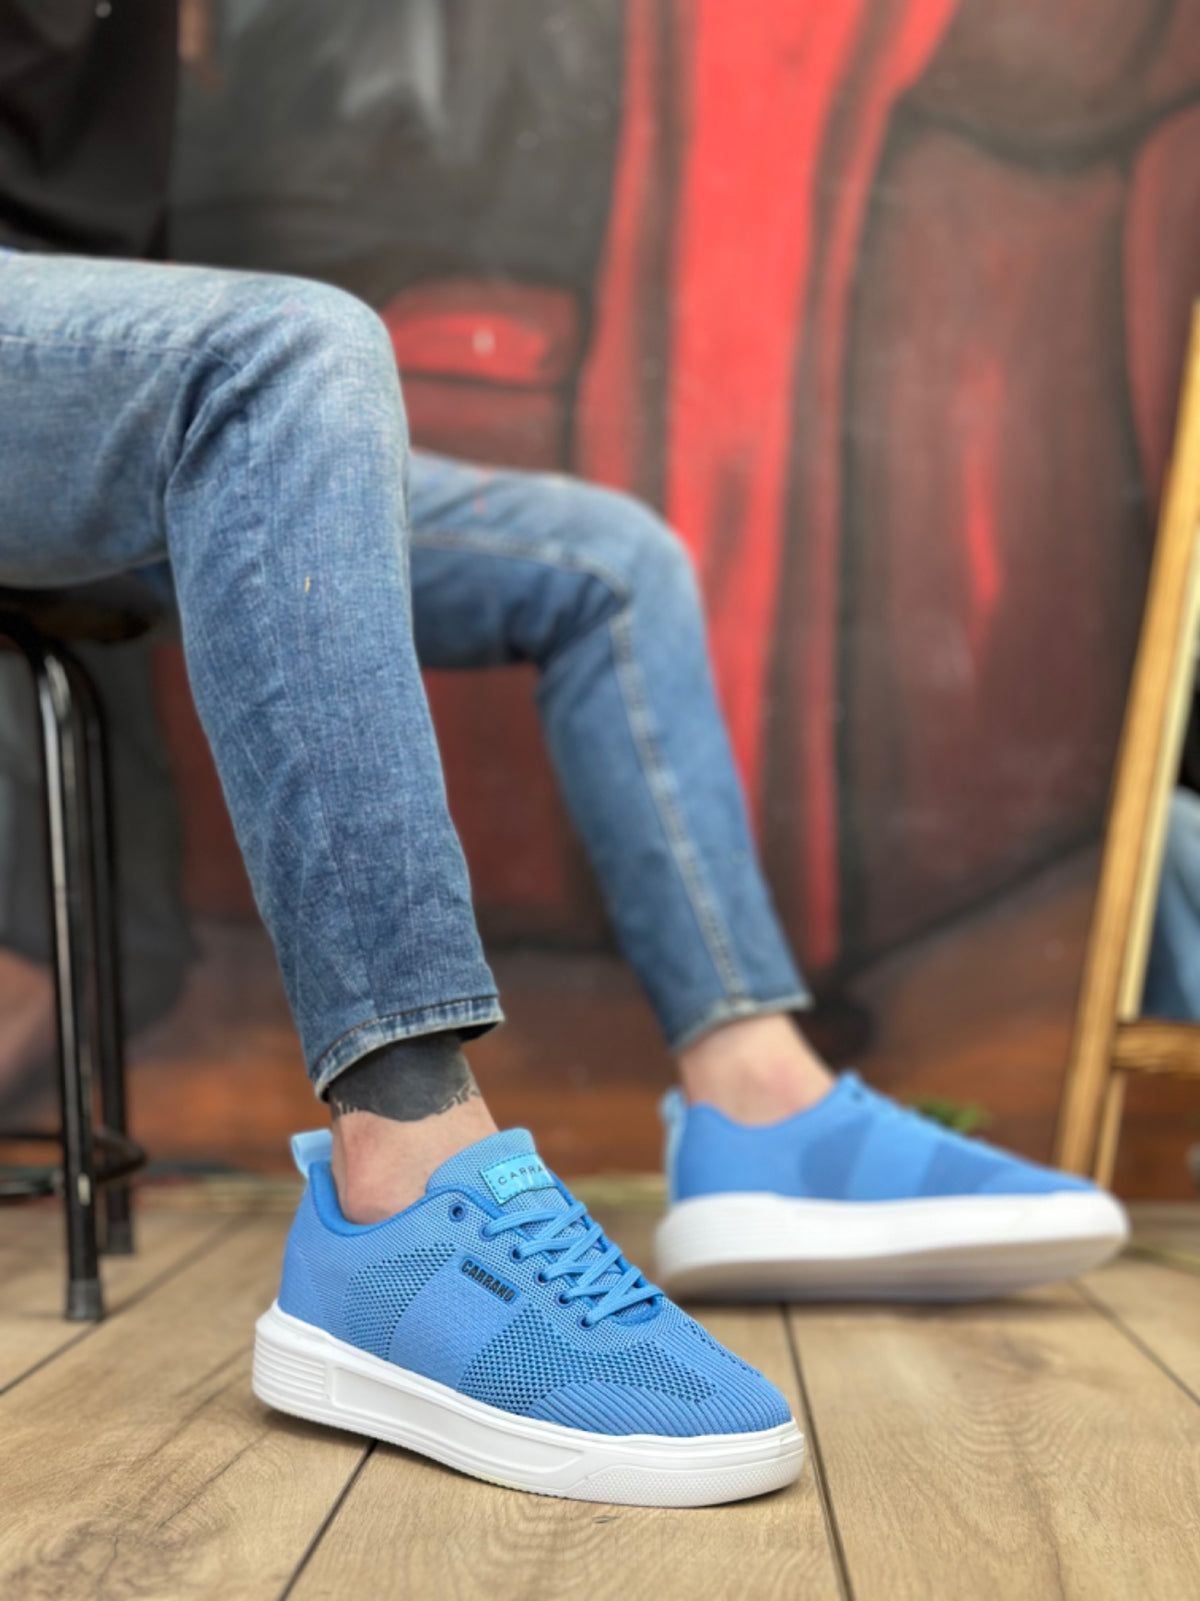 BA0349 Special Knitted Knitwear High Sole Style Blue Color Sports Shoes - STREETMODE™